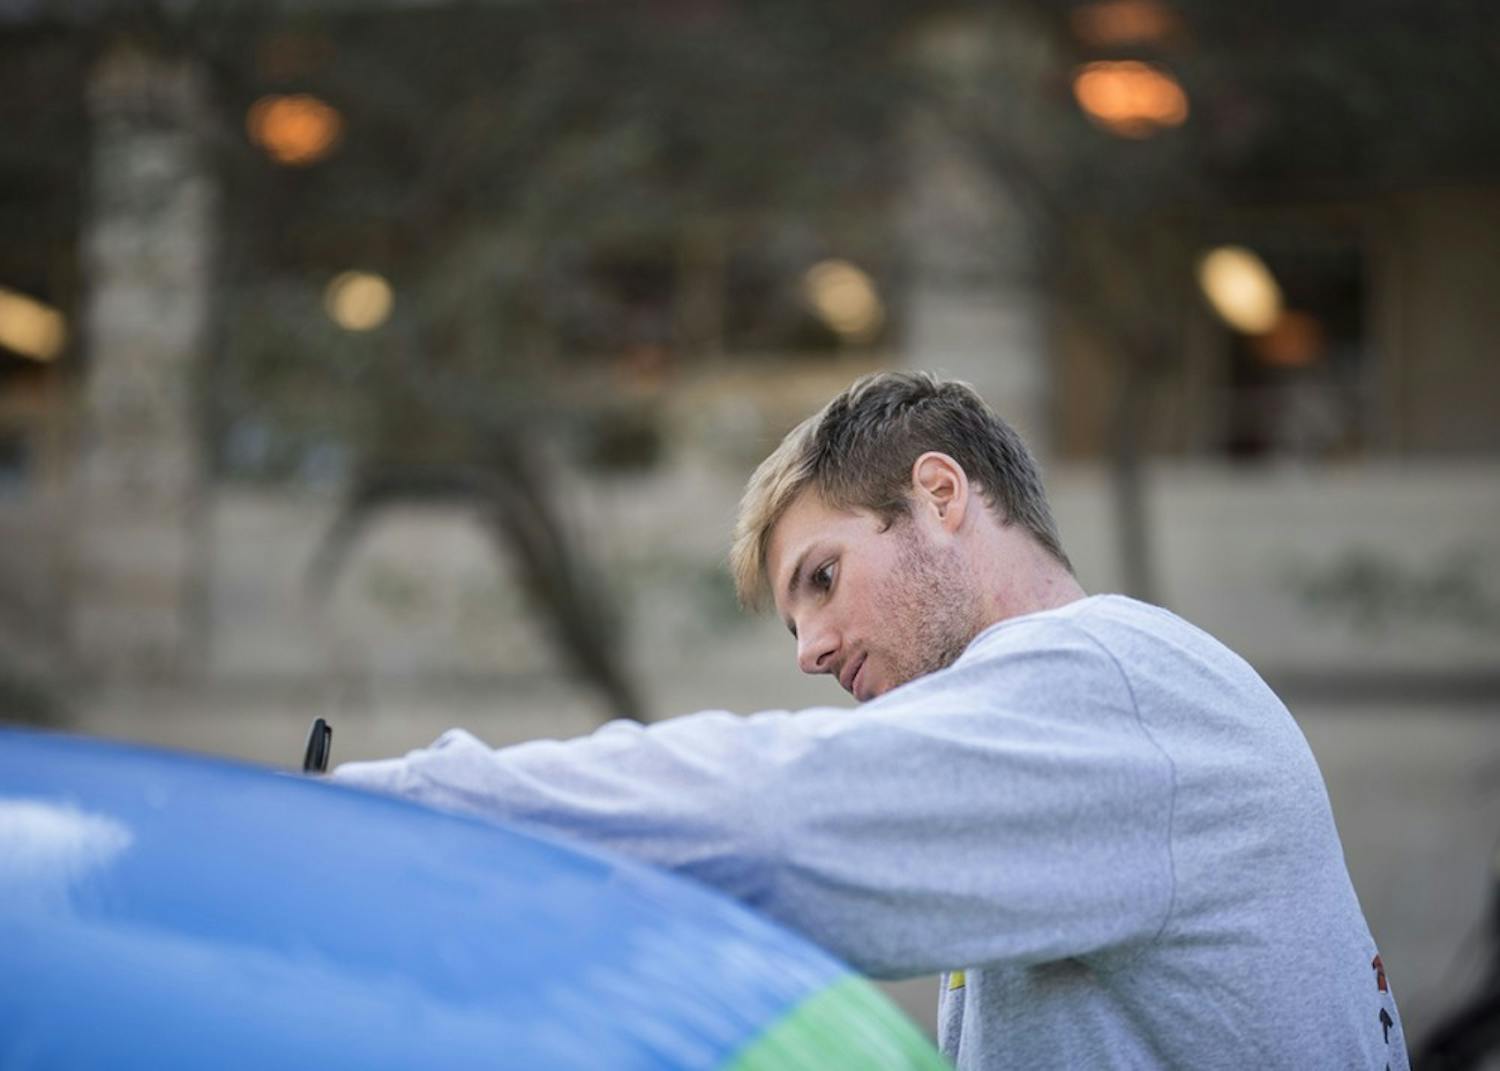 Joe Krahulik, senior, signs the free speech ball outside Ballantine Thursday. Young Americans for Liberty asked people to write whatever they wanted on the giant beach ball in the spirit of free speech.&nbsp;